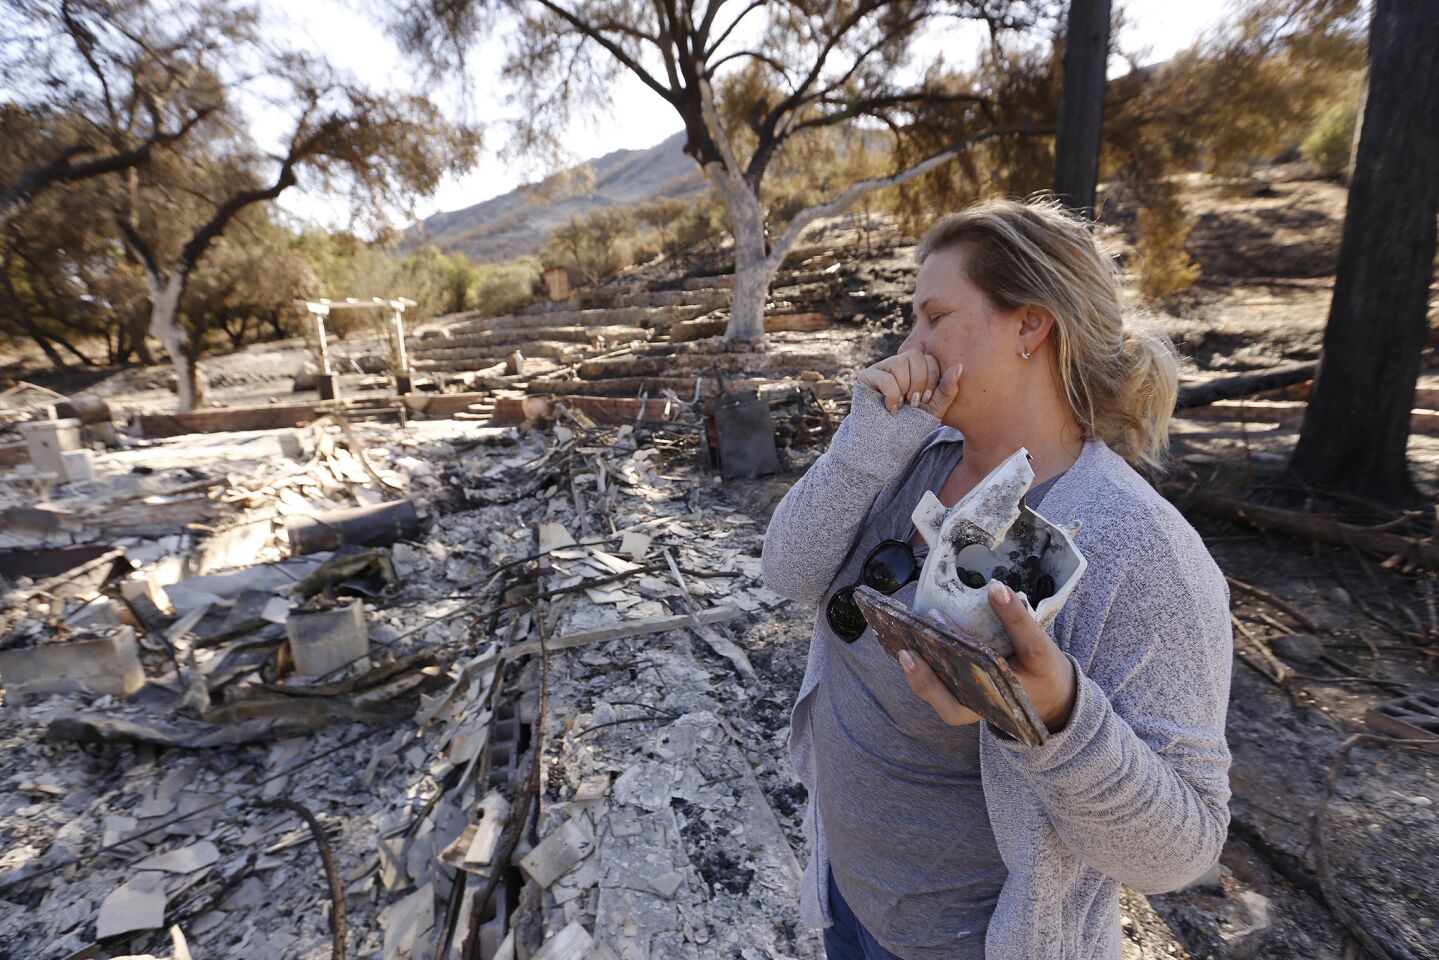 "We lost everything," said Rachel Bailey. Bailey and her partner, David Carr, were vacationing in Mexico. They flew back Monday and saw what was left of their street in Oak Forest Mobile Estates in Westlake Village.